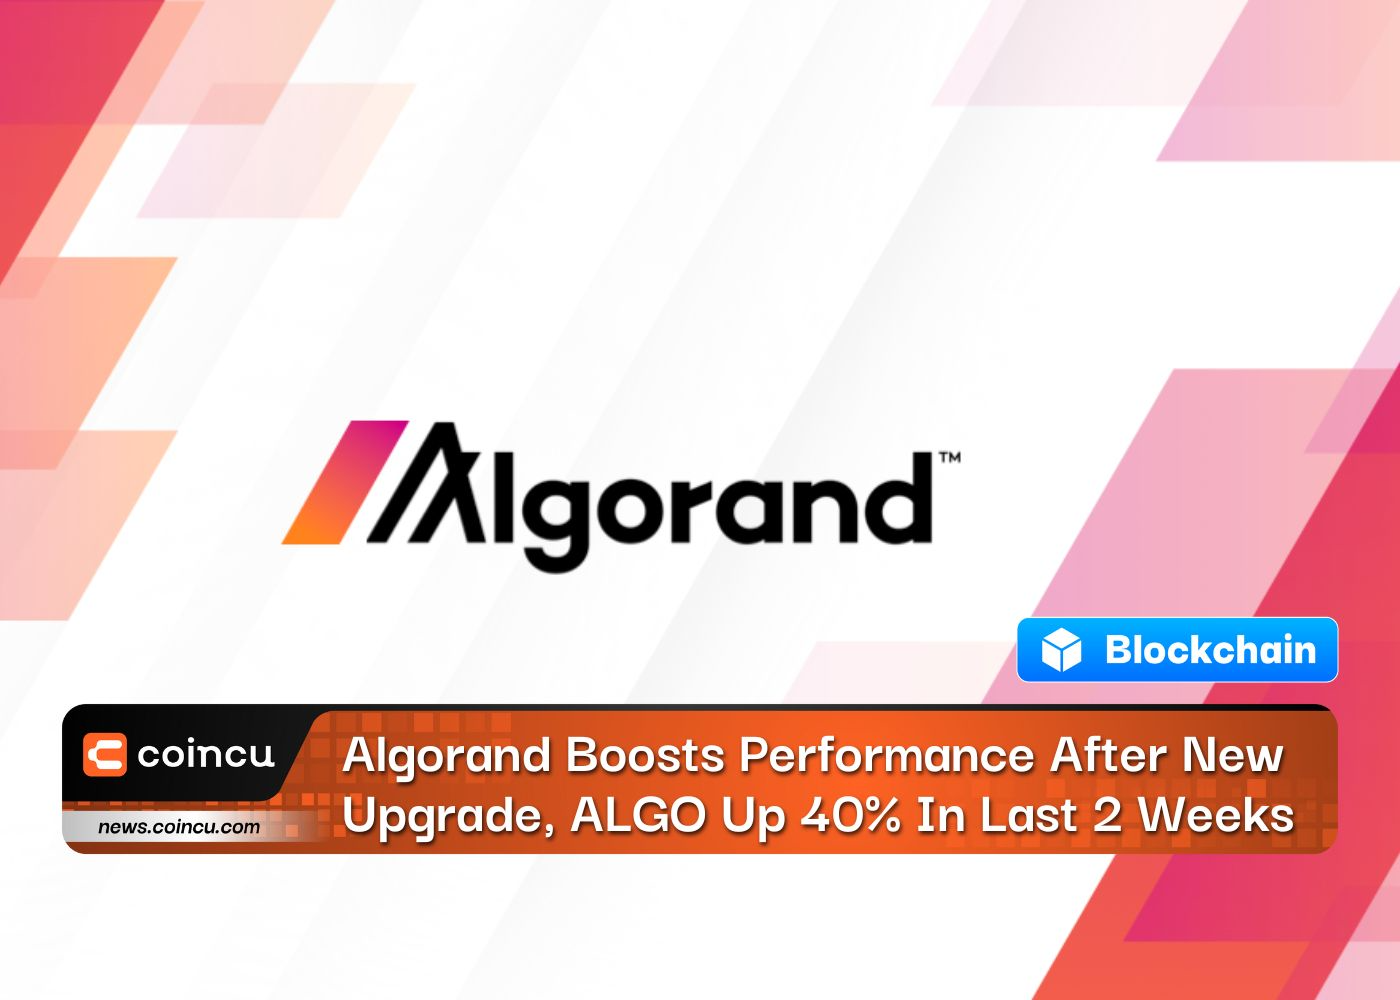 Algorand Boosts Performance After New Upgrade, ALGO Up 40% In Last 2 Weeks